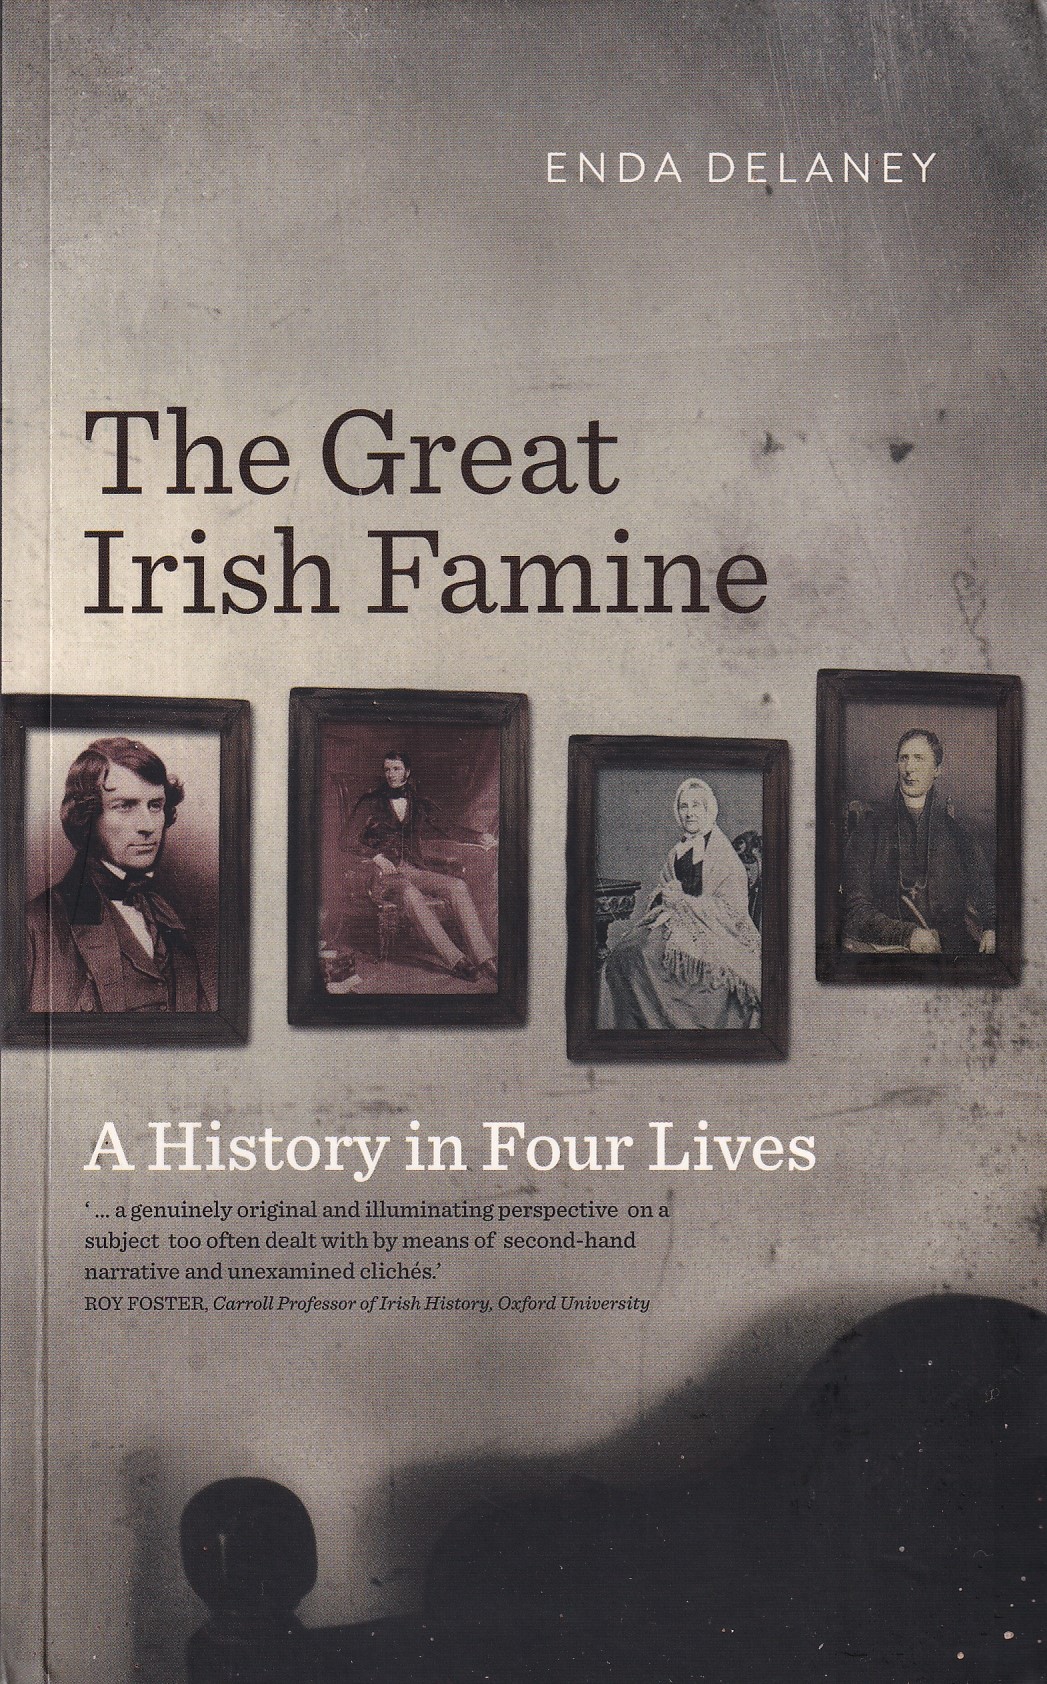 The Great Irish Famine: A History in Four Lives by Enda Delaney